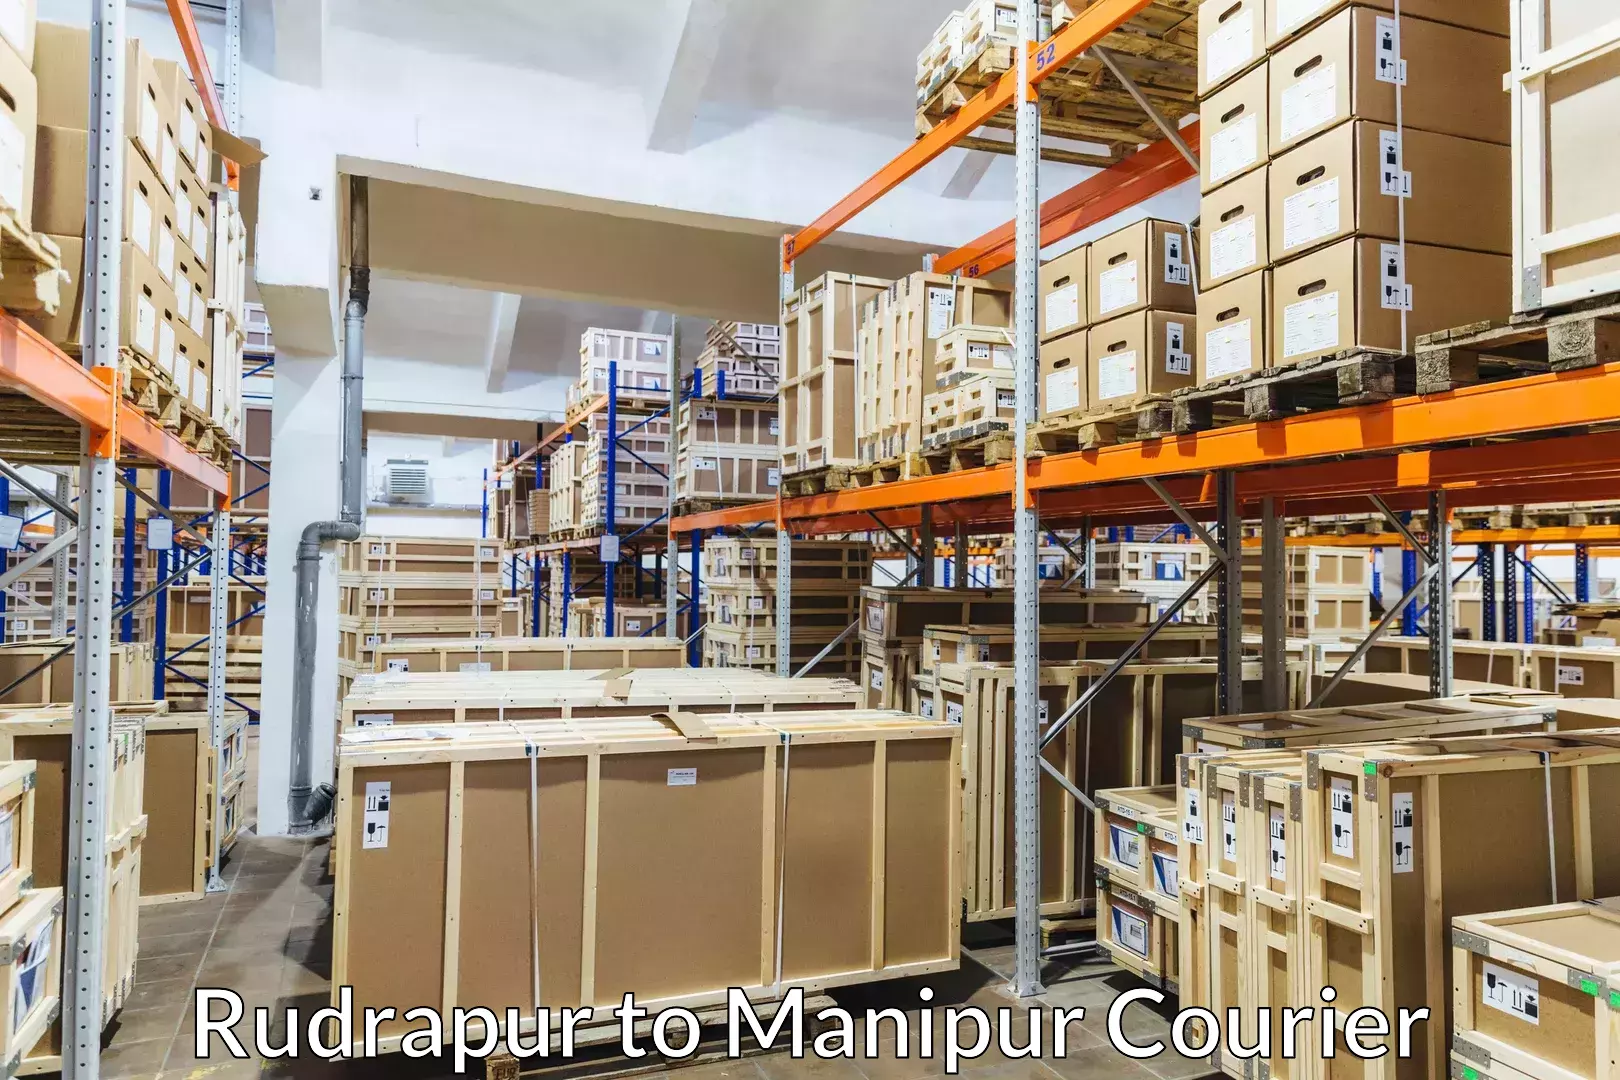 Baggage transport innovation Rudrapur to Manipur